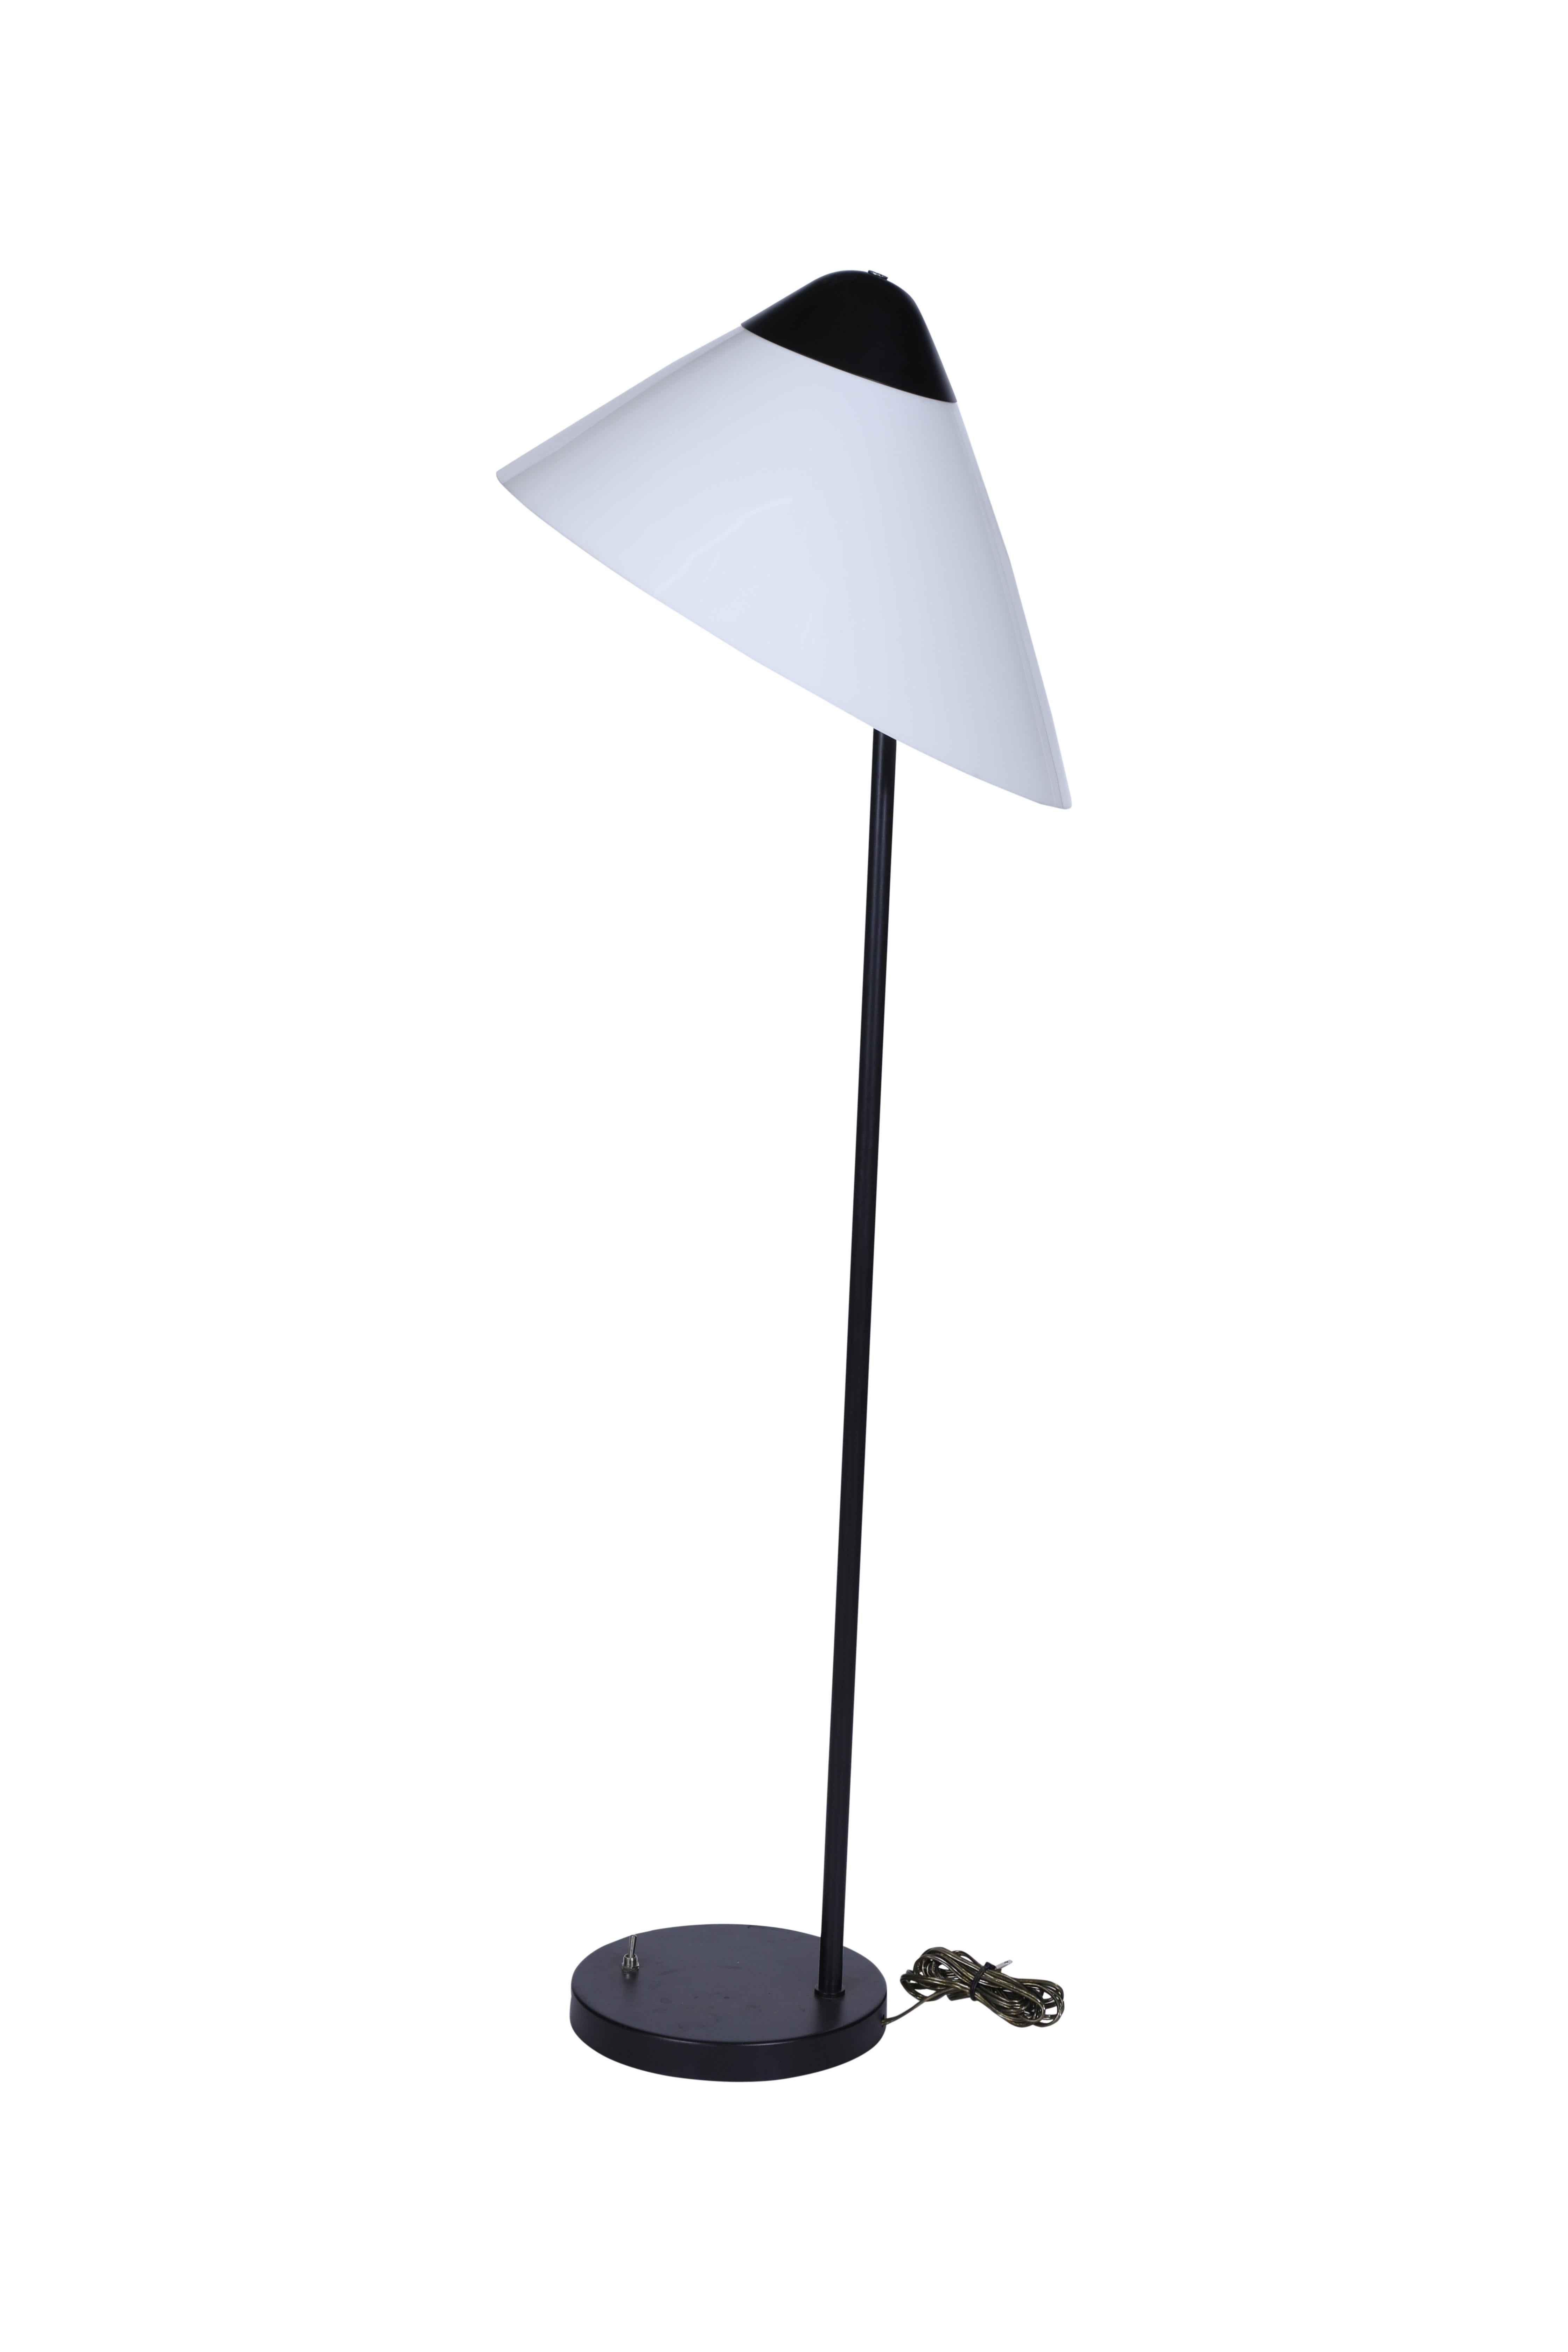 A Mid Century Modern floor lamp by Louis Poulsen, a Danish lighting manufacturer.  It is an iron base with a large asymmetrical acrylic shade.  The base itself measures 10